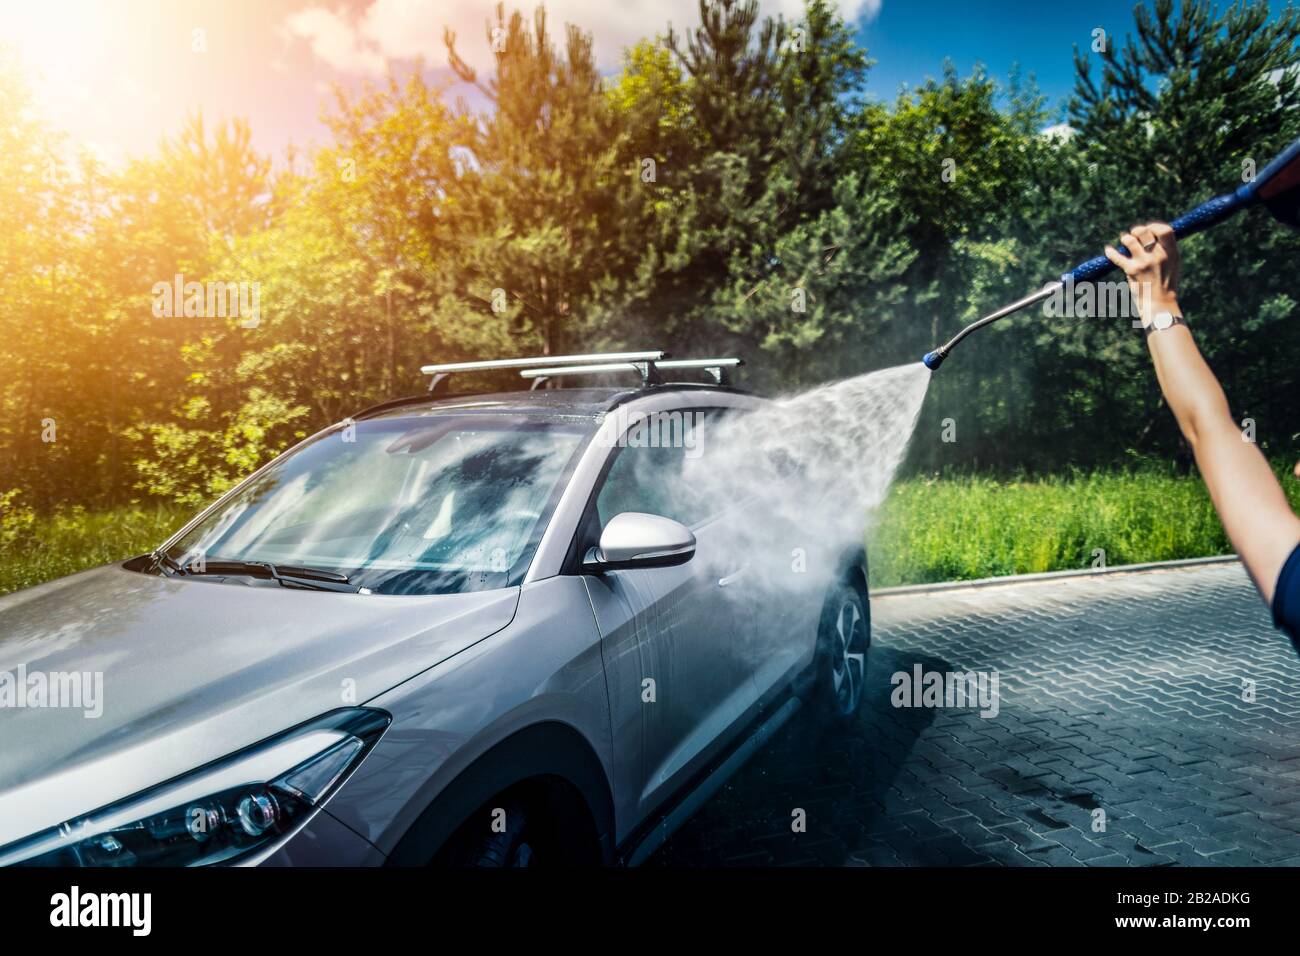 Manual car wash with pressurized water in car wash outside. Stock Photo